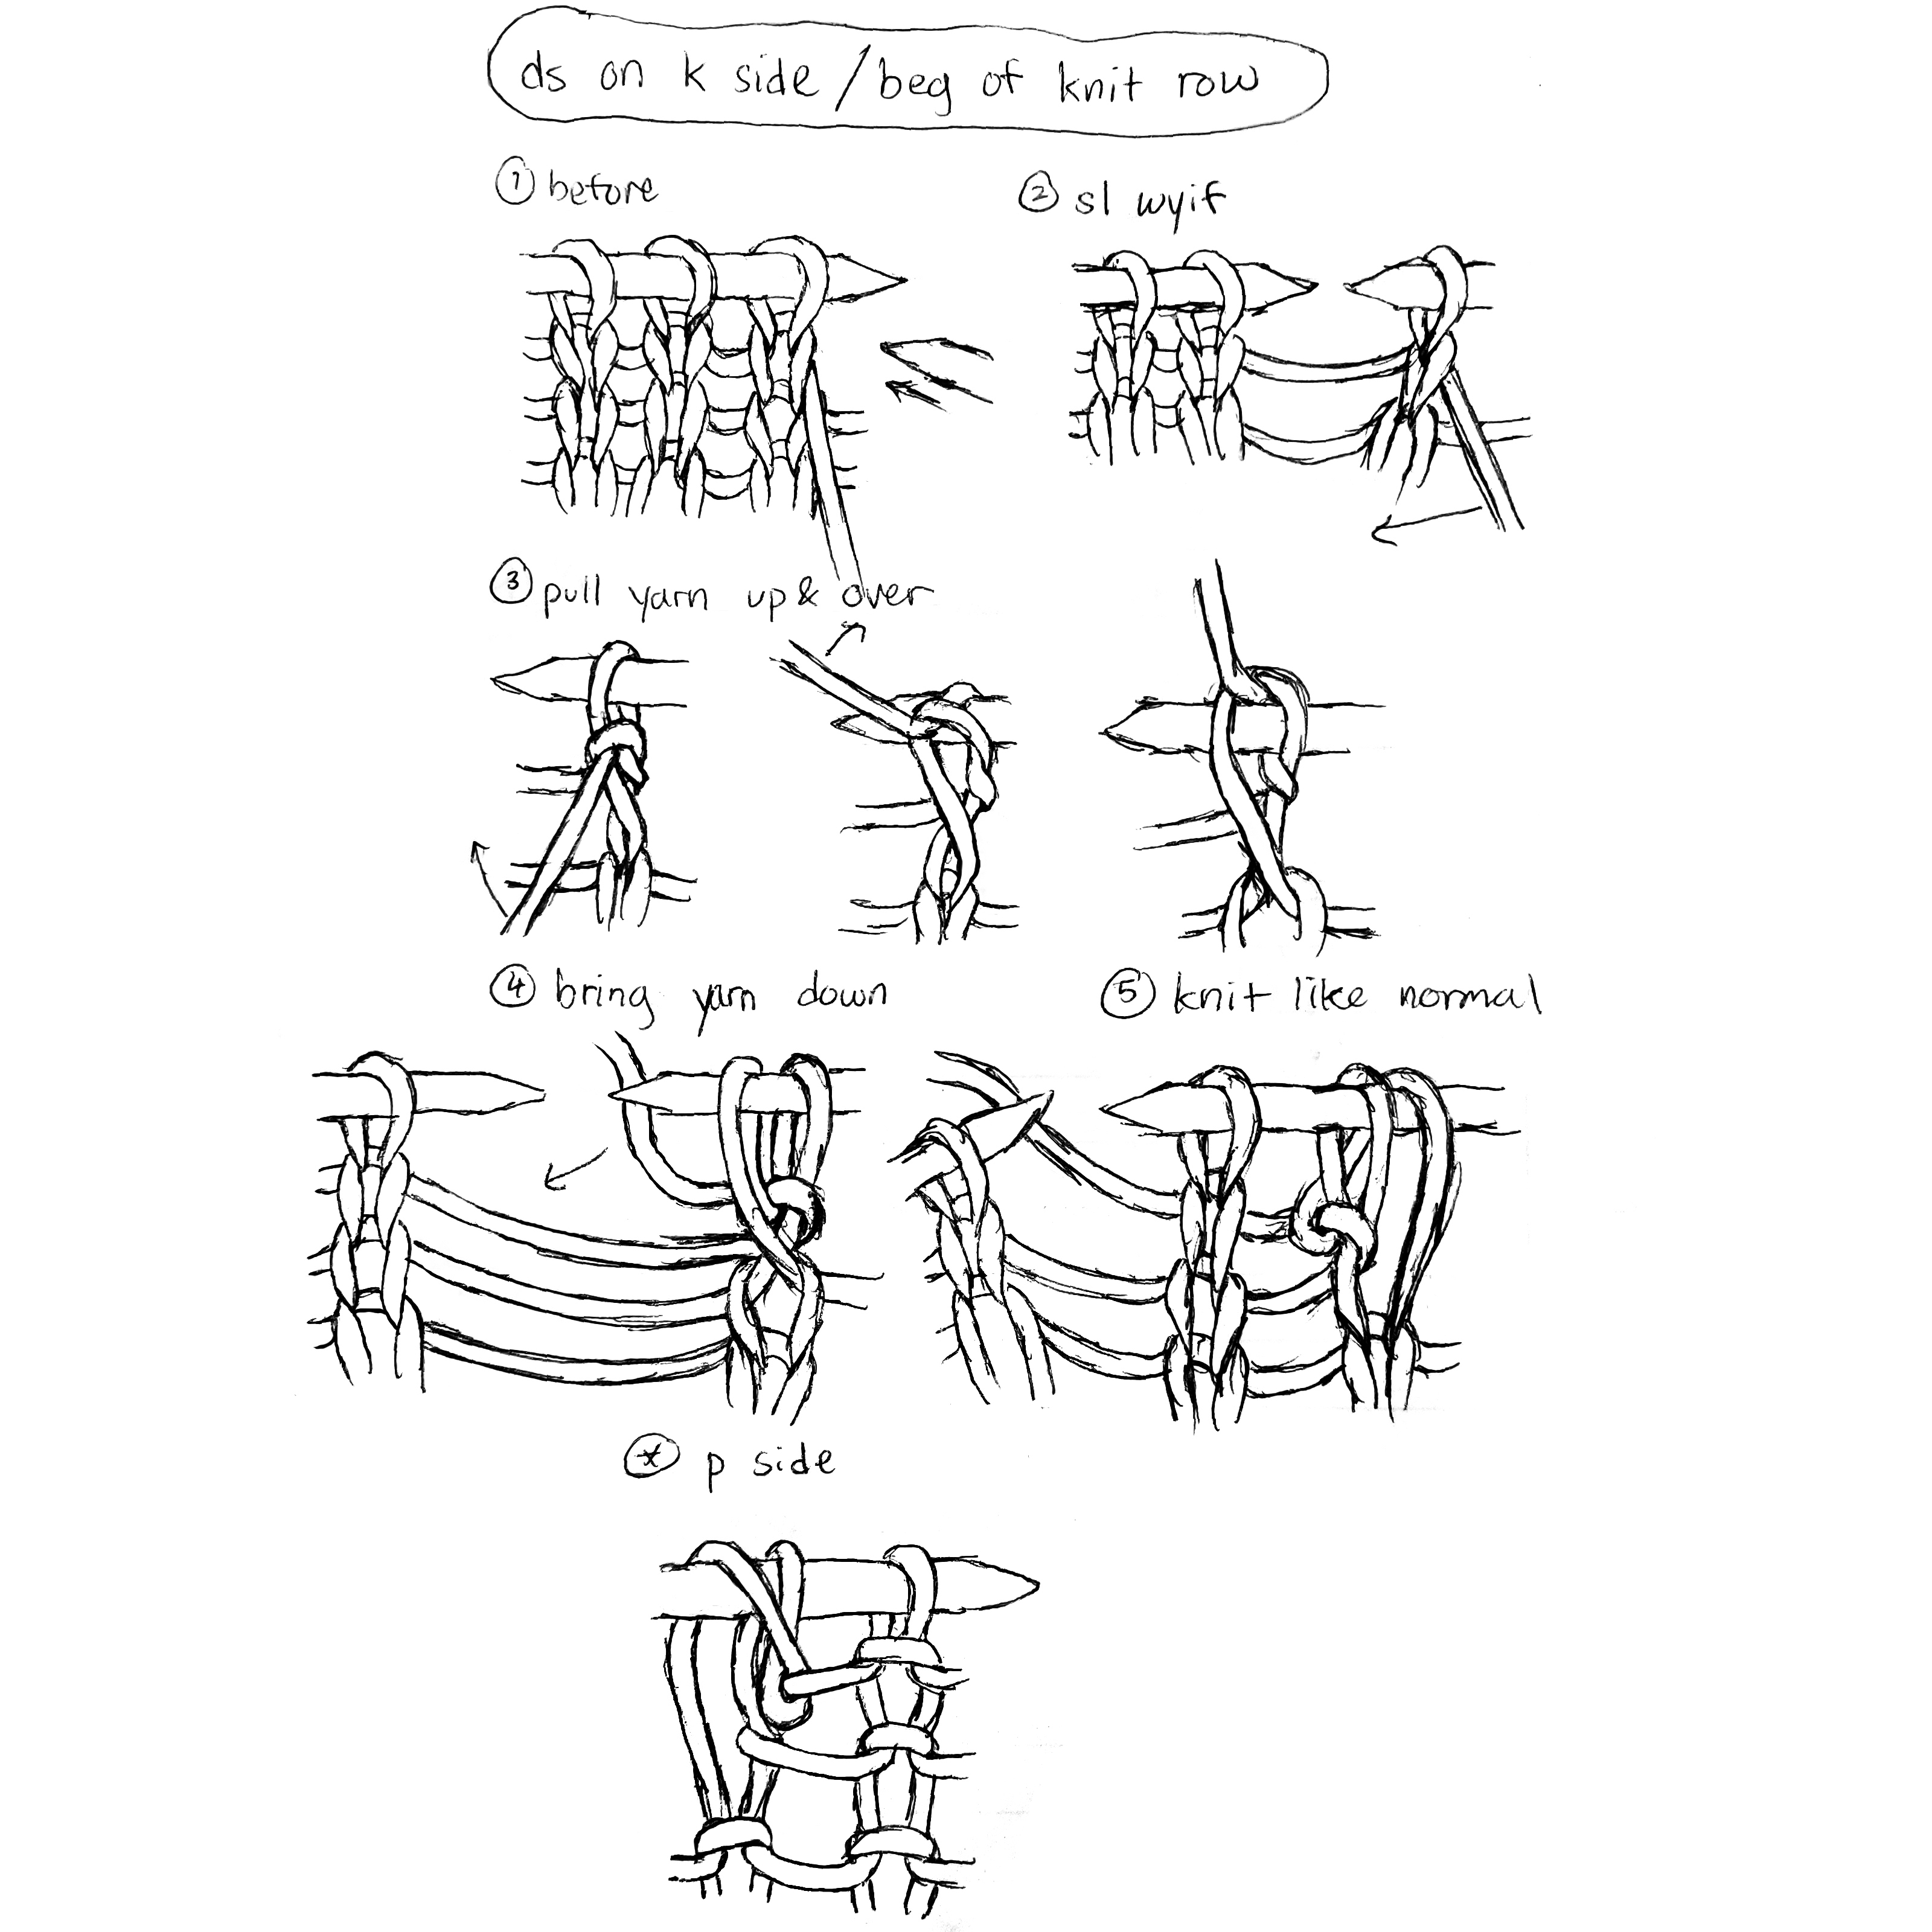 Step-by-step hand drawings of needles and yarn making a double stitch